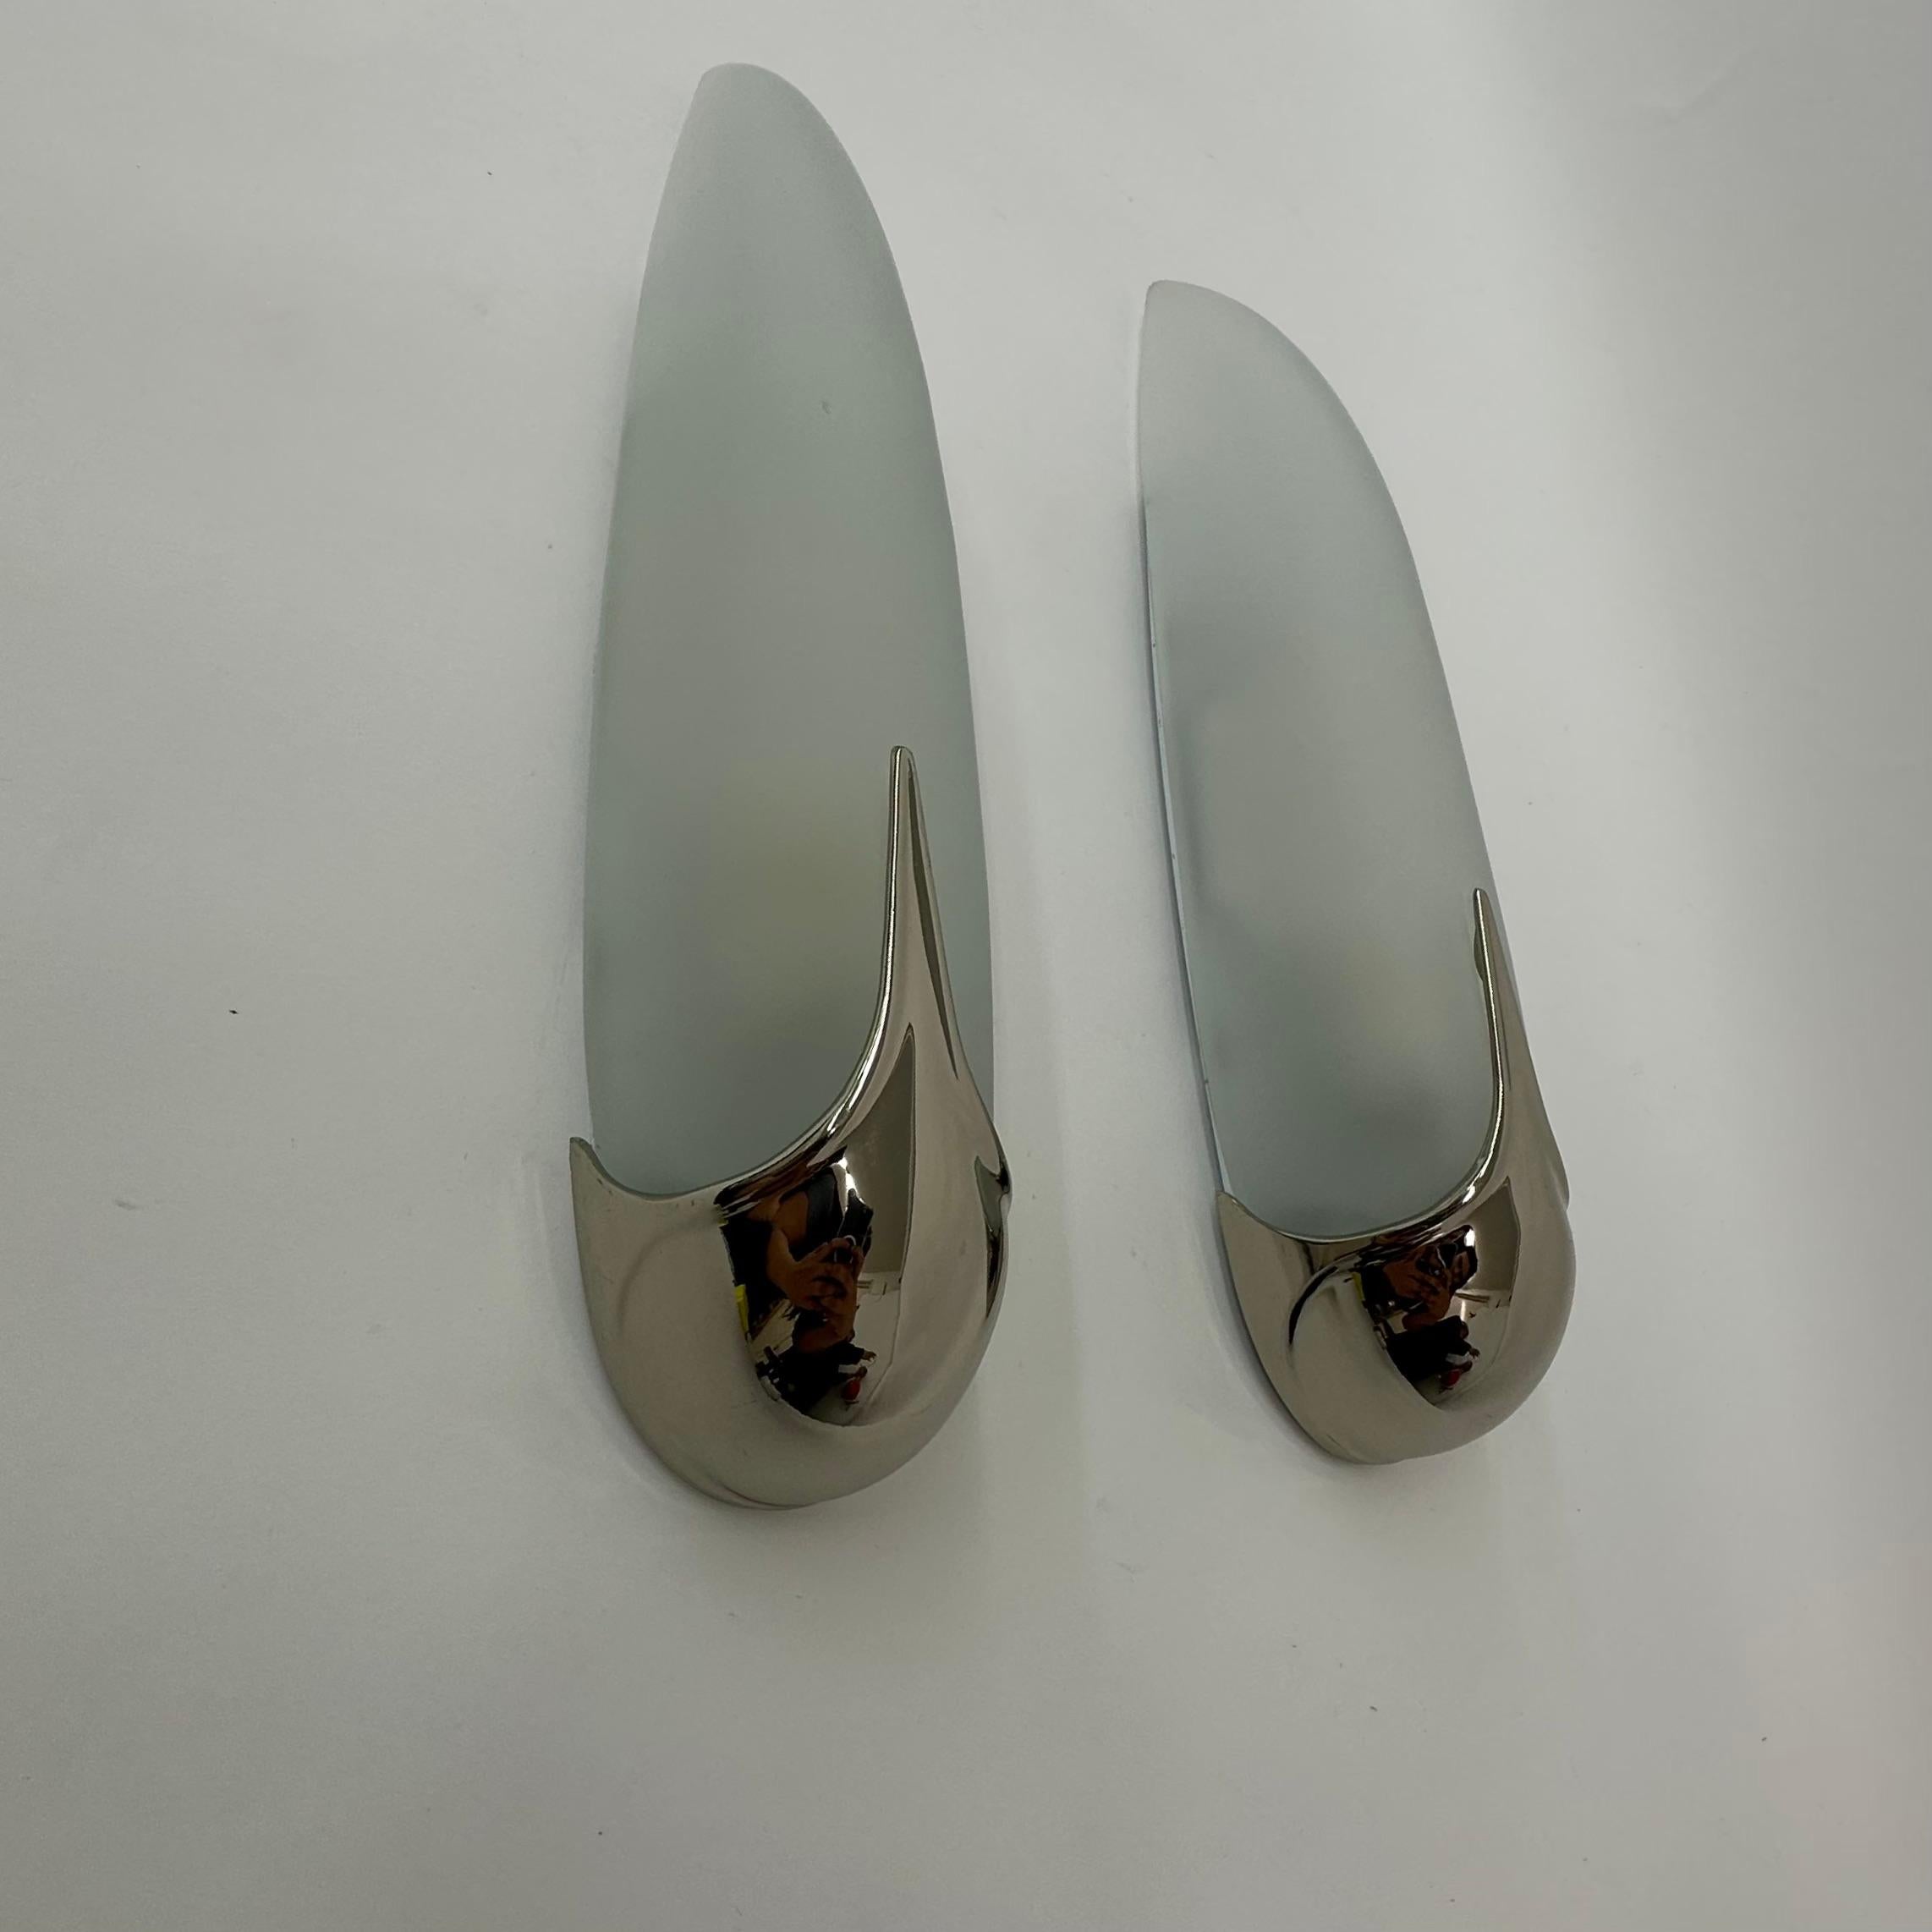 Pair of Idearte Sconces Wall Lamps, Spain, 1980s For Sale 8